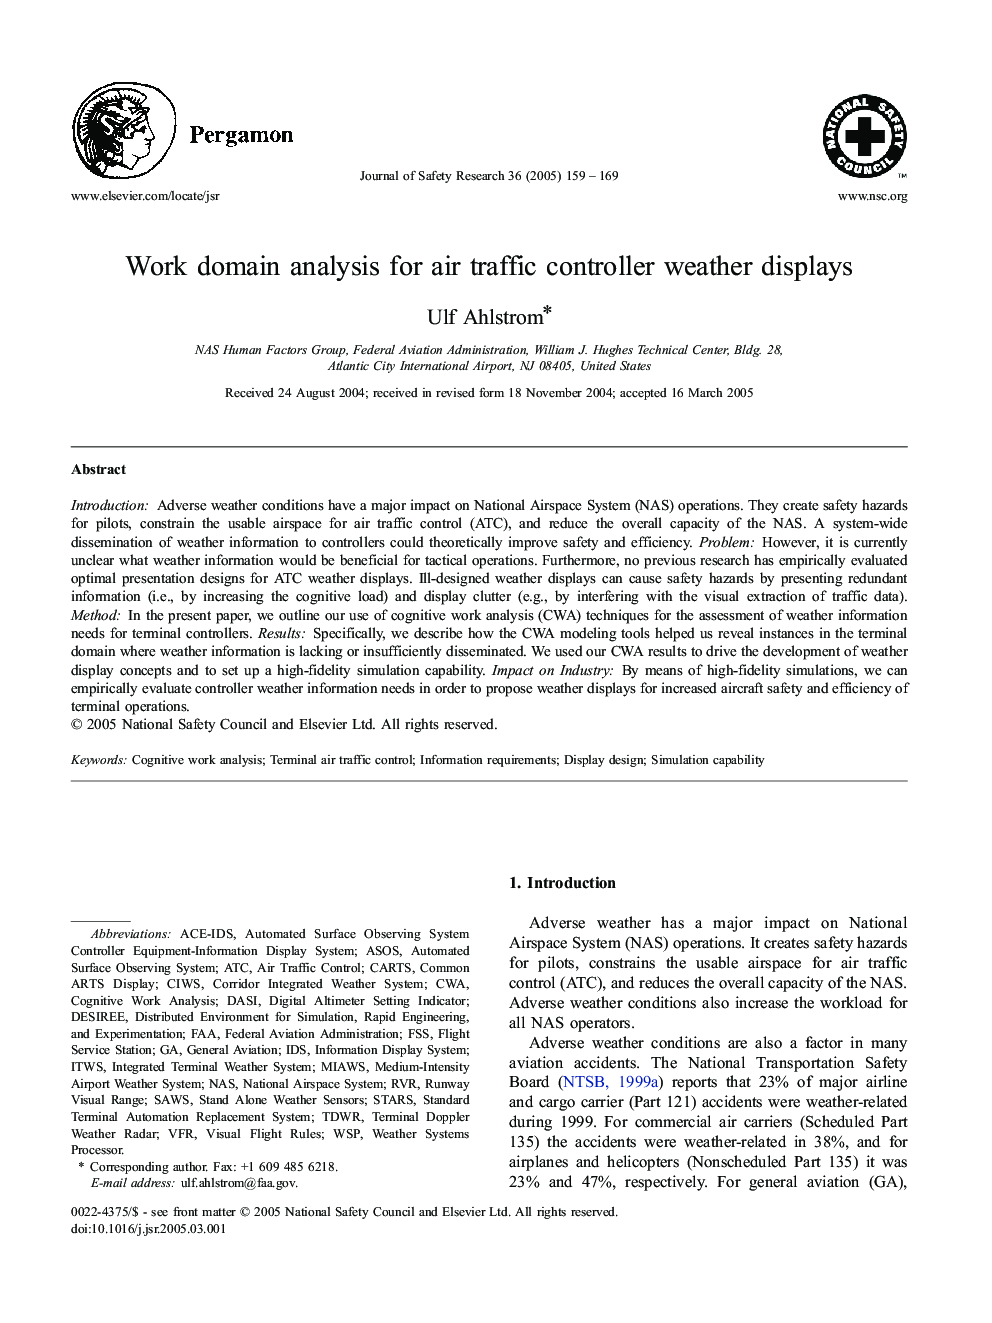 Work domain analysis for air traffic controller weather displays